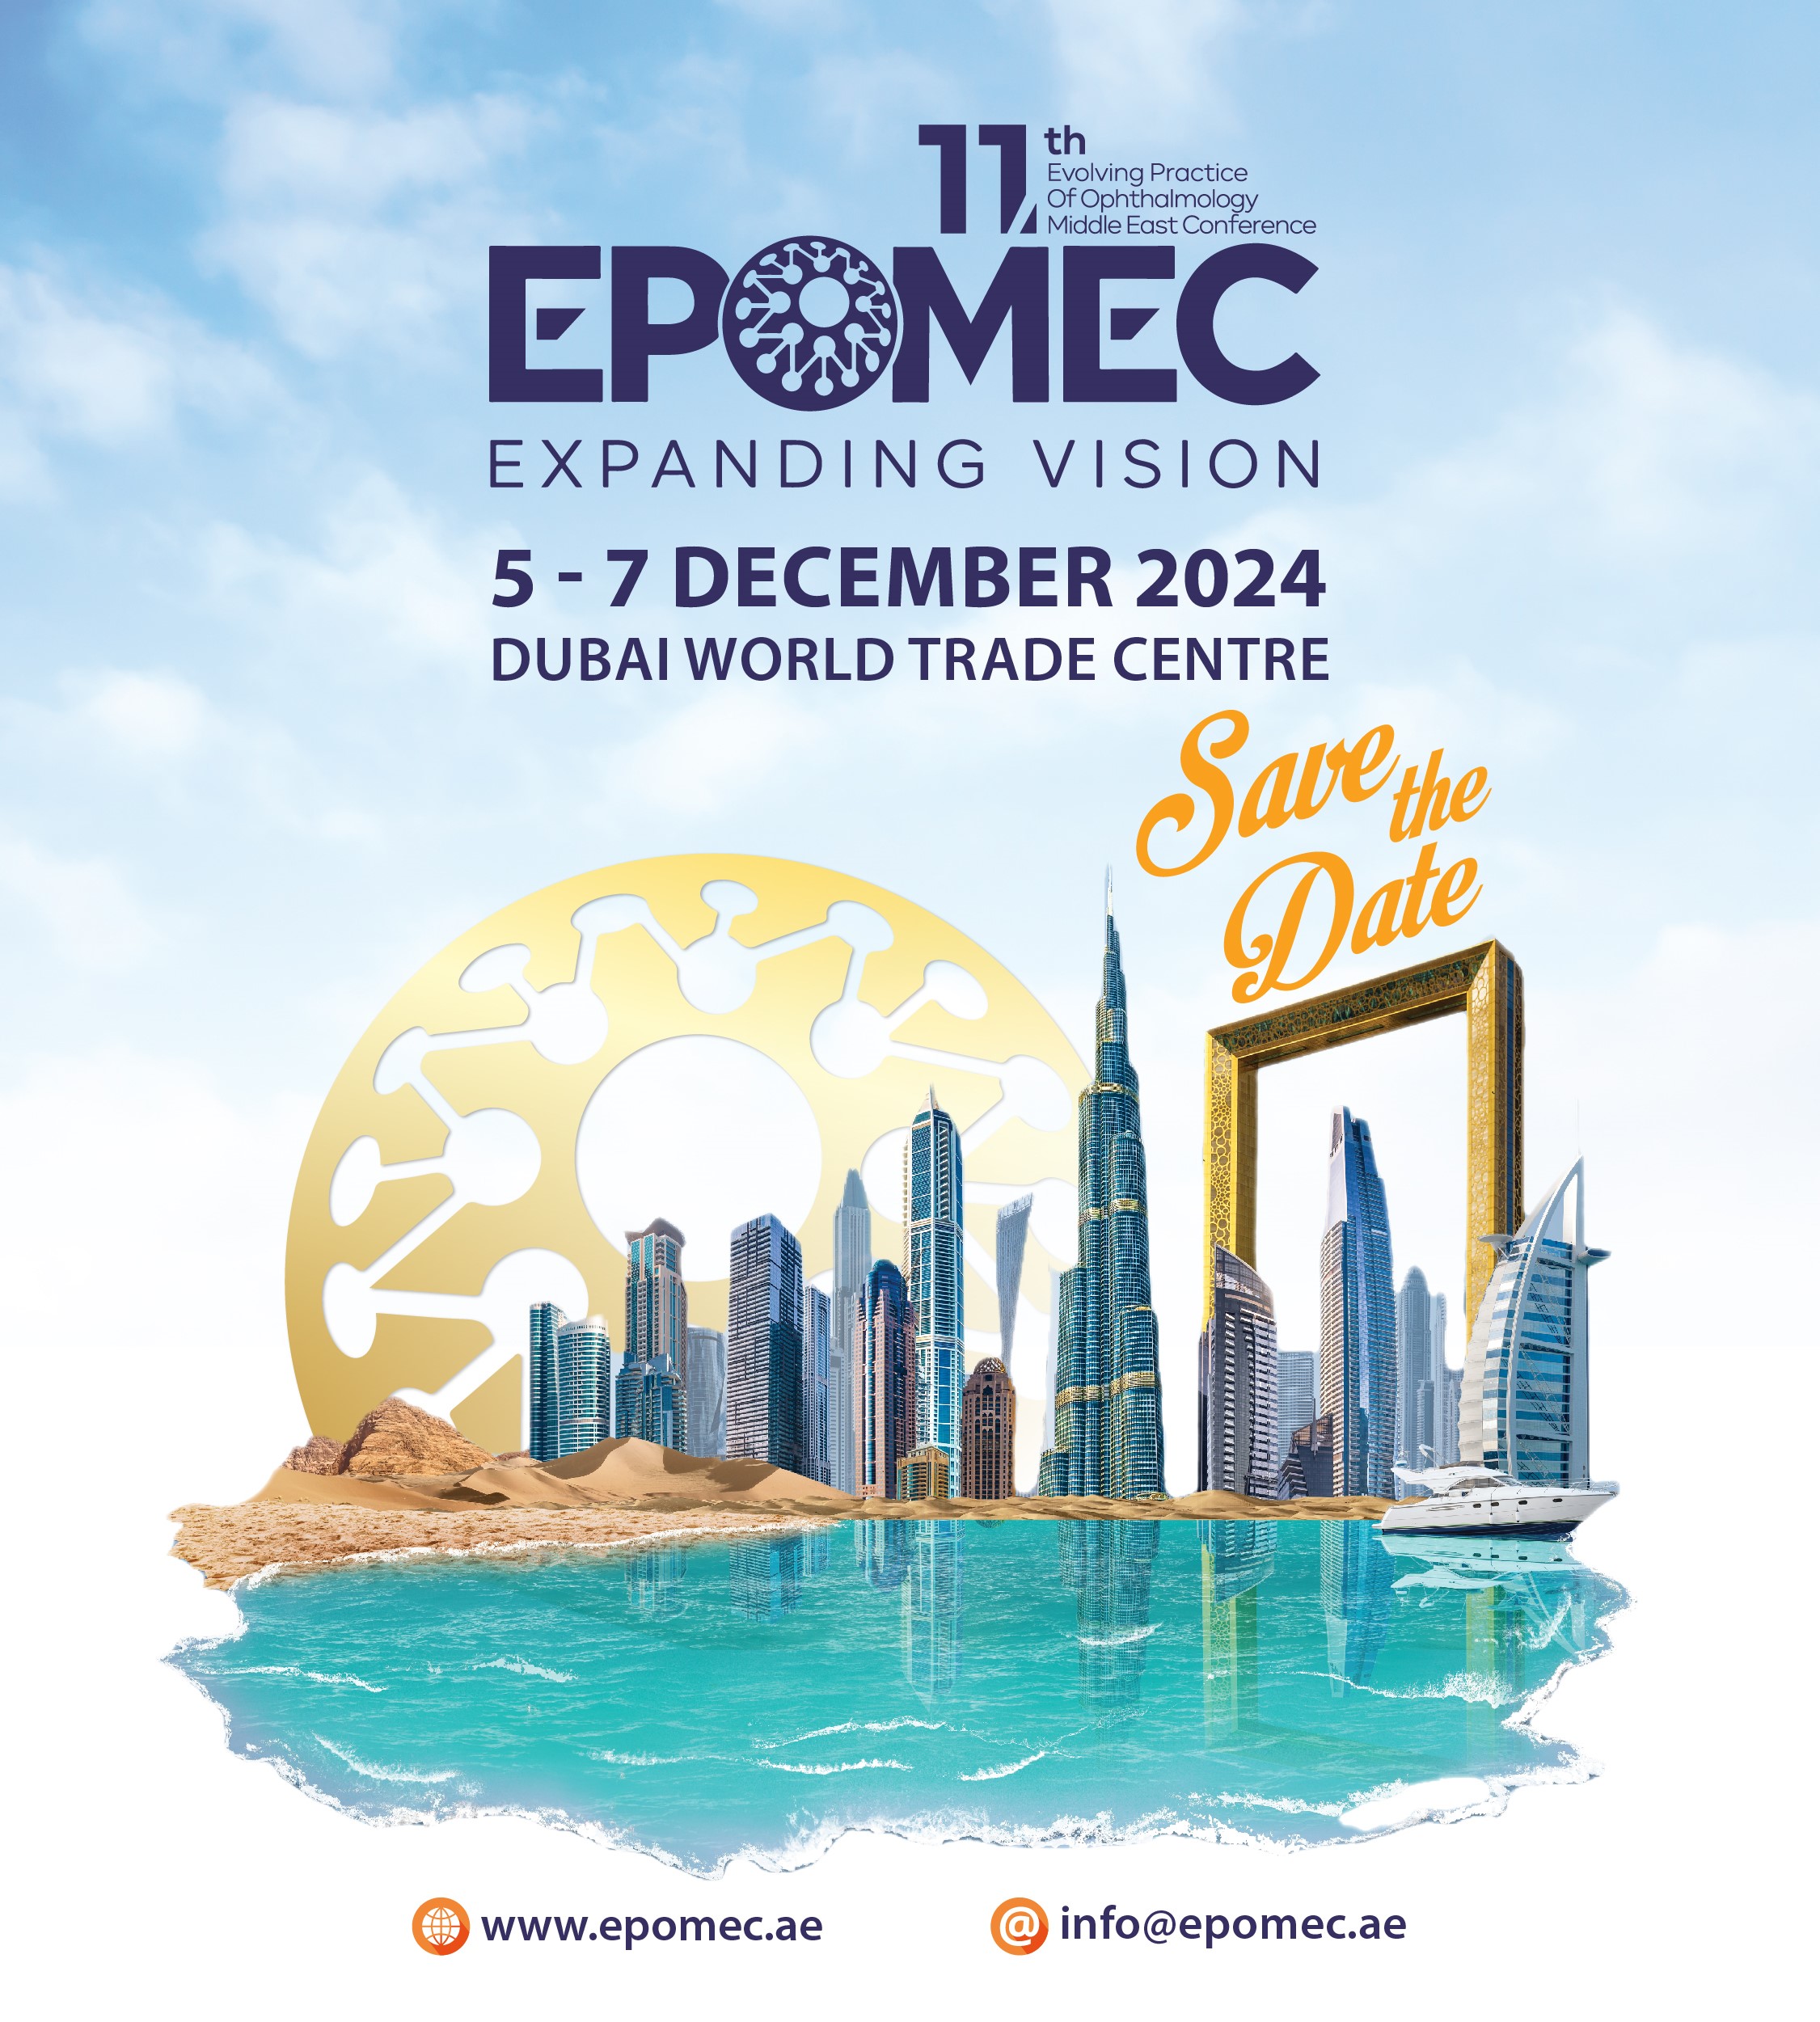 Join Us at the 11th EPOMEC on 5-7 December, 2024